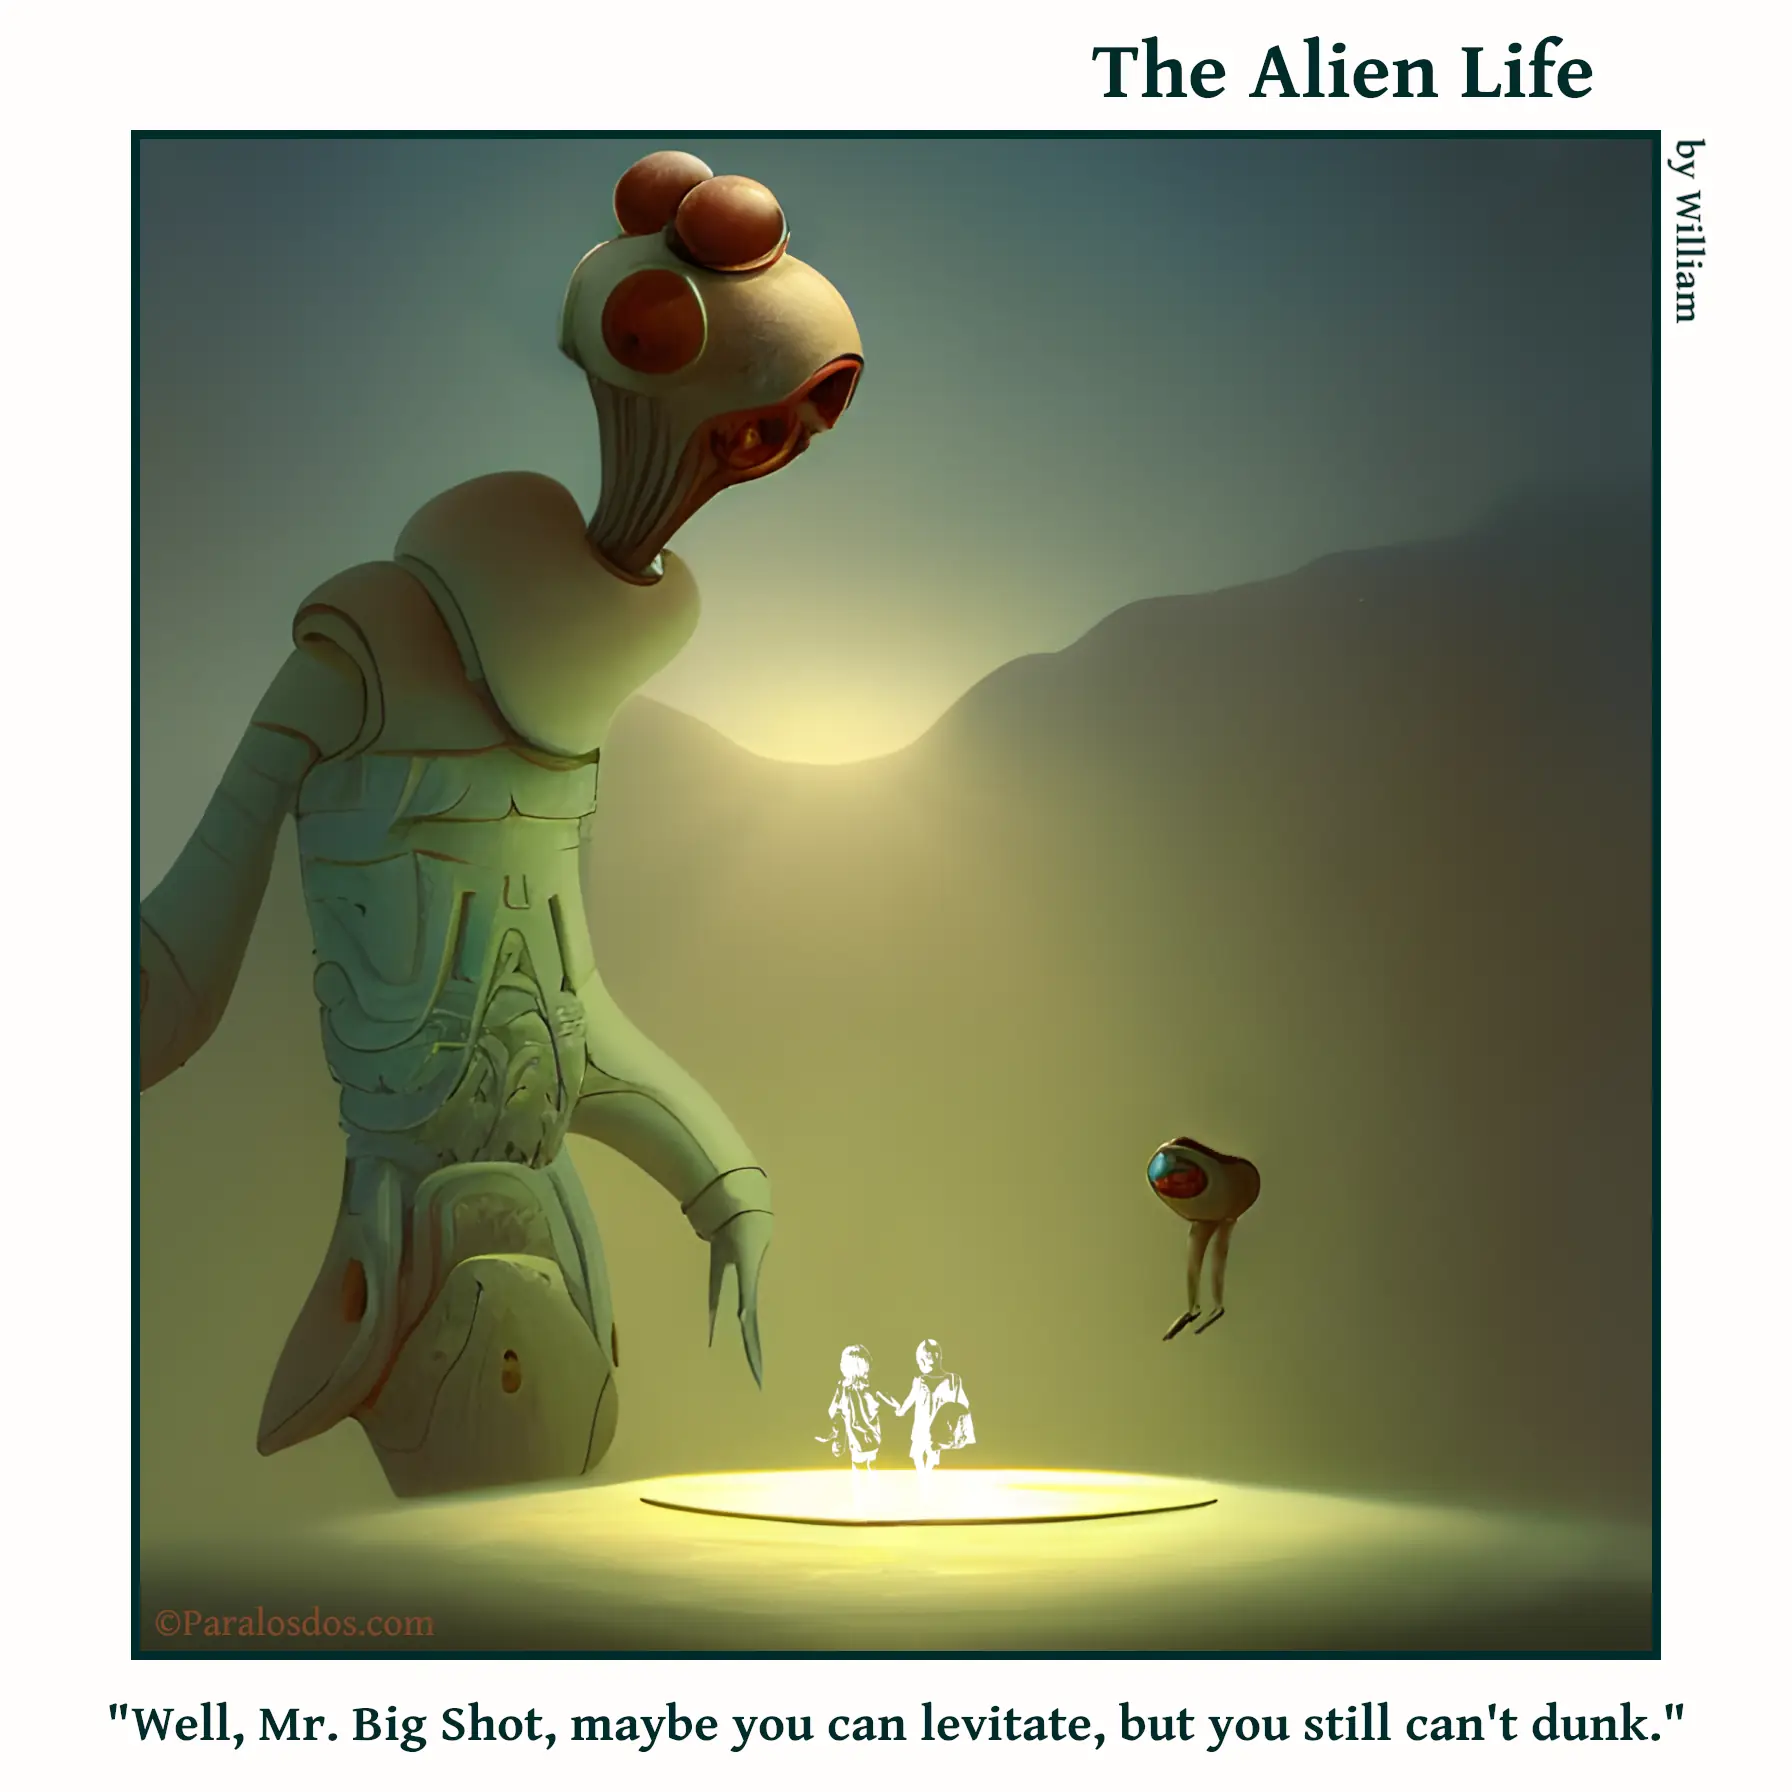 The Alien Life, one panel Comic. An extremely tall alien is looking at a very small alien who is hovering over the ground. The caption reads: "Well, Mr. Big Shot, maybe you can levitate, but you still can't dunk."